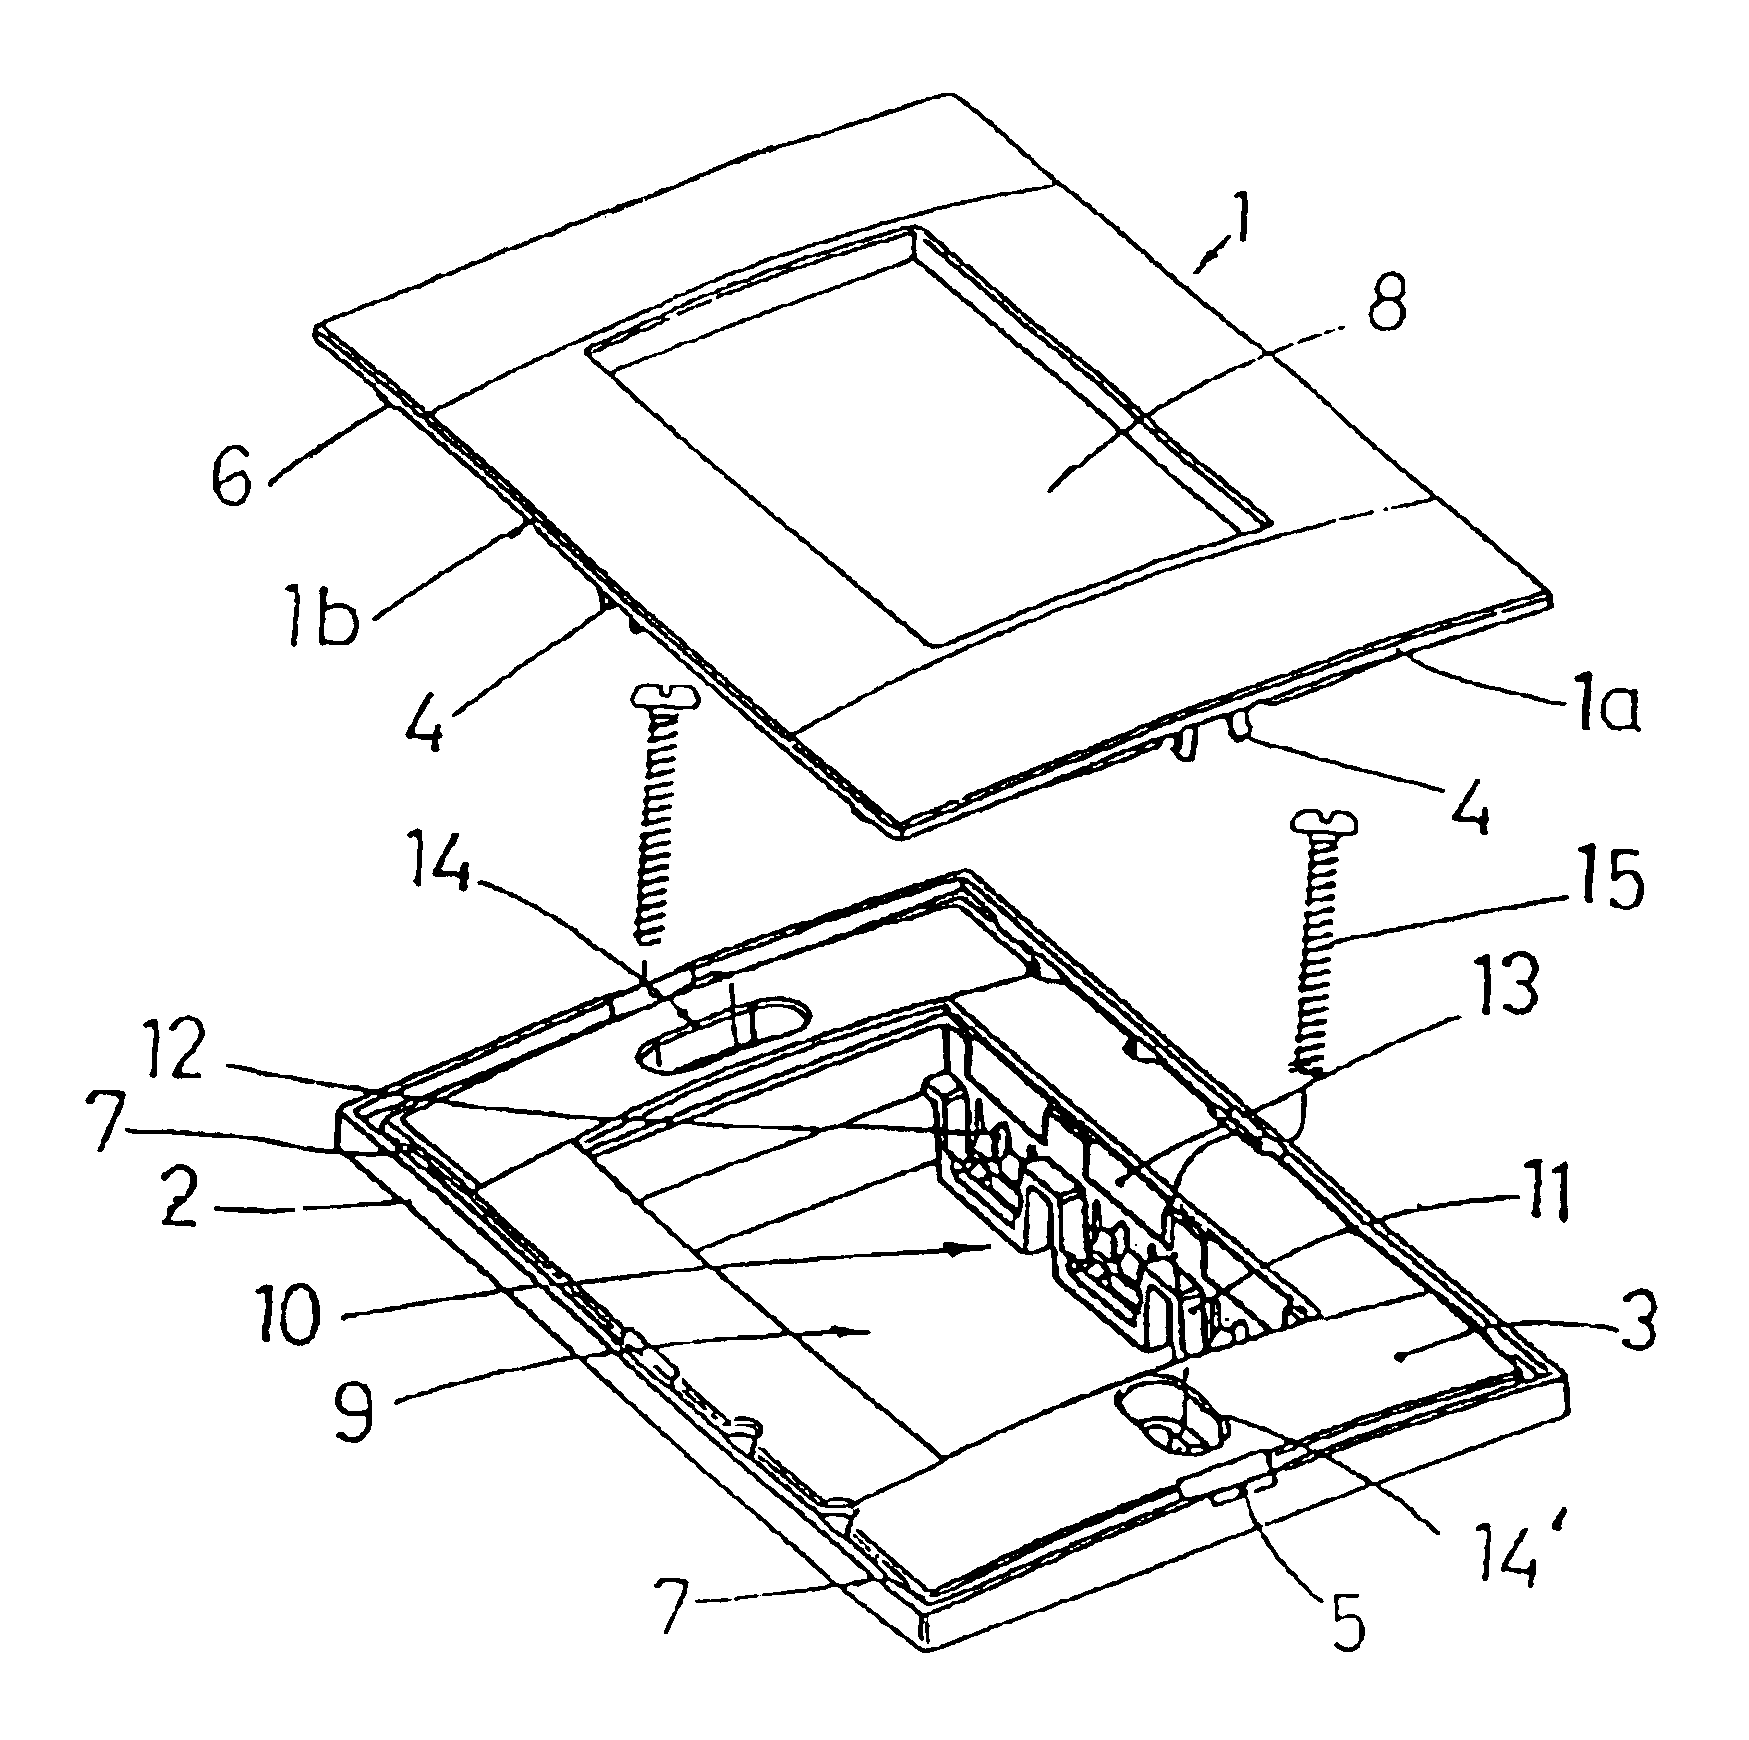 Low voltage device used as an electrical outlet base plate